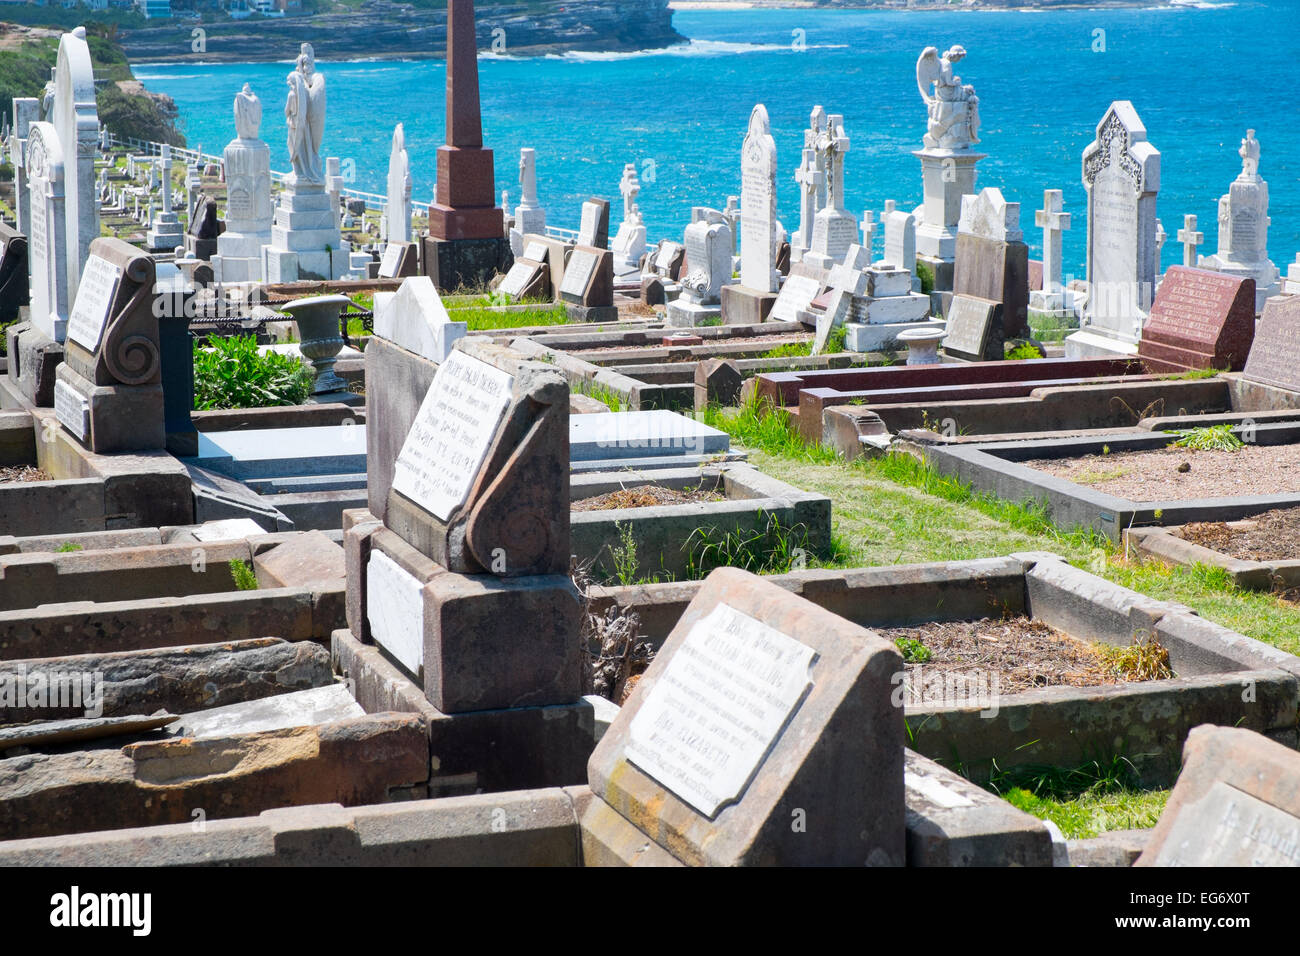 Waverley cemetery, opened in 1877, located on the cliffs at Bronte  in Sydneys  eastern suburbs, new south wales,australia Stock Photo